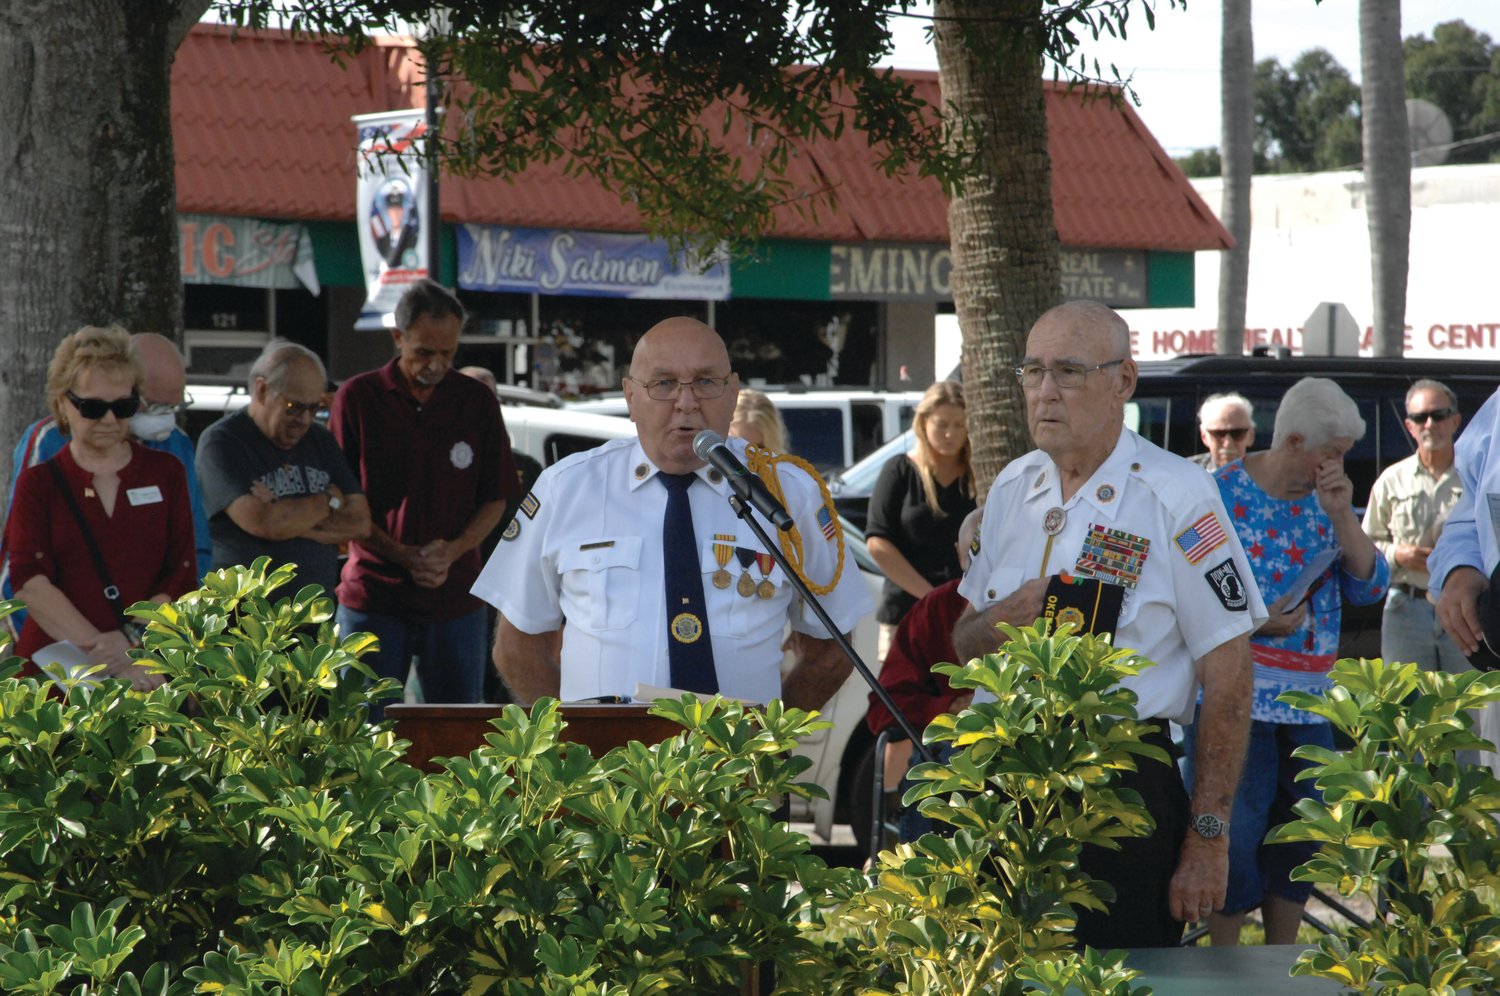 Dan Fennell of American Legion Post #64 was the master of ceremonies for the Veterans Day Services in Okeechobee on Nov. 11.